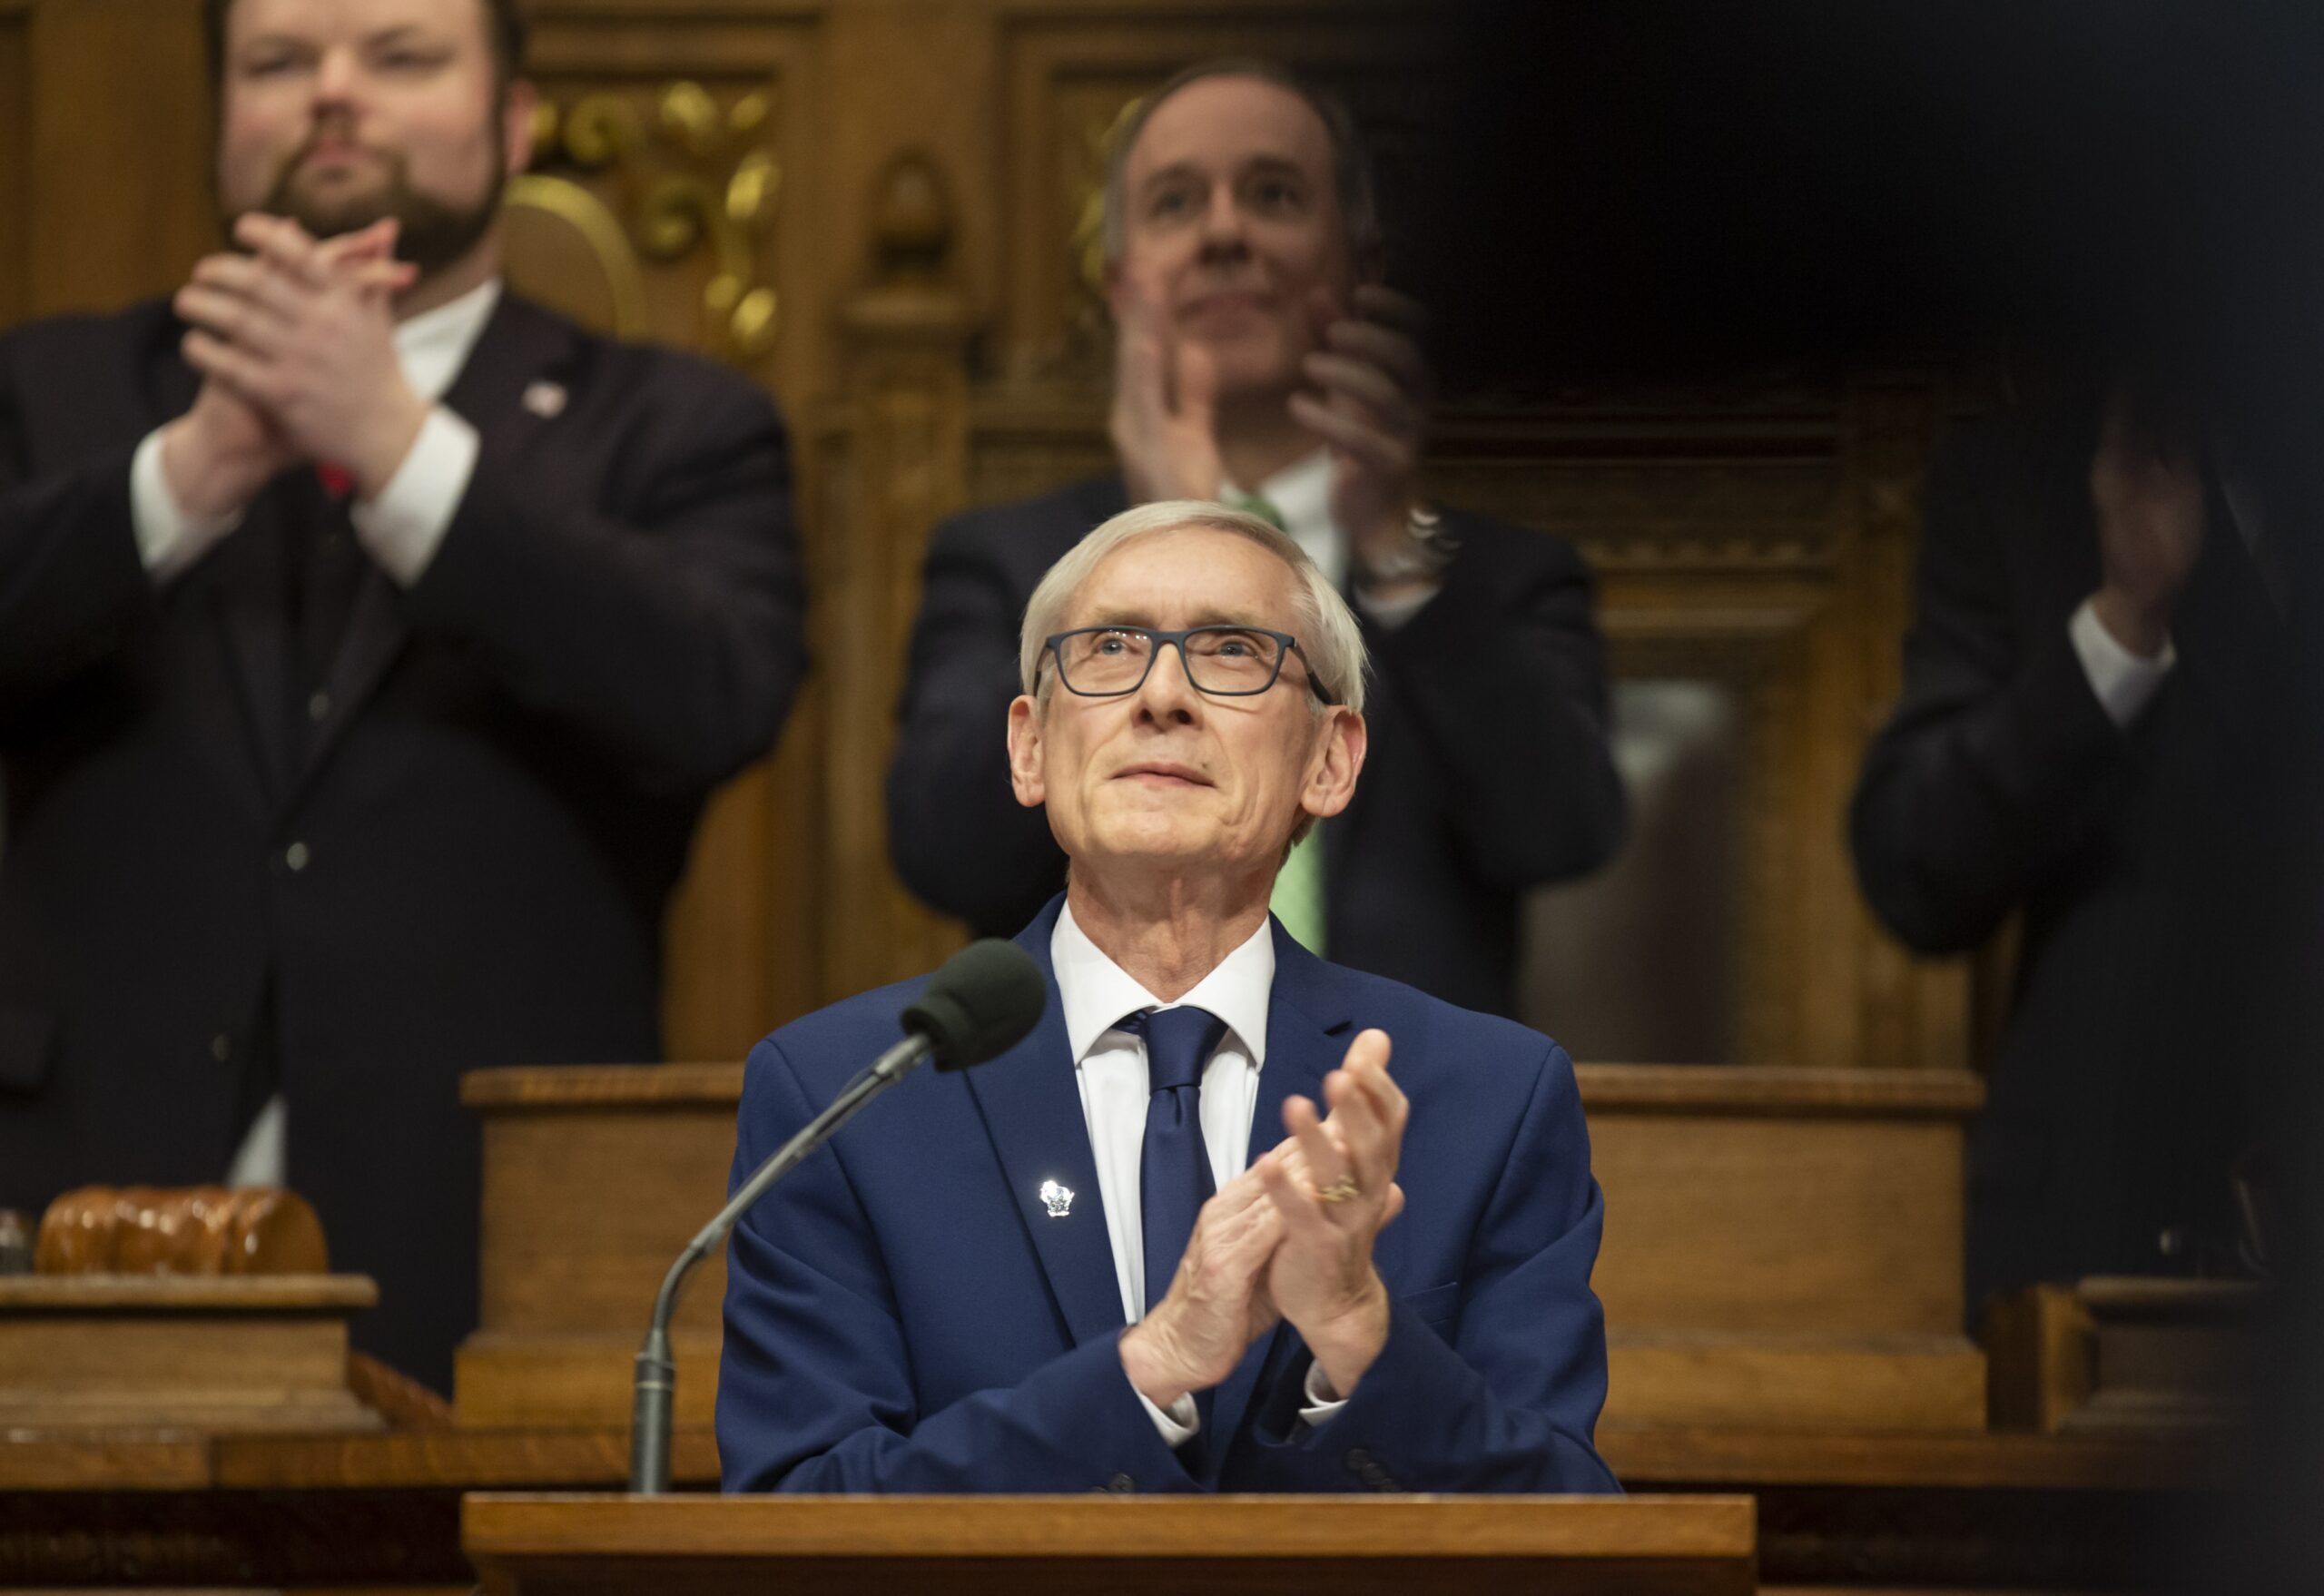 Gov. Tony Evers addresses the Legislature at the State of the State